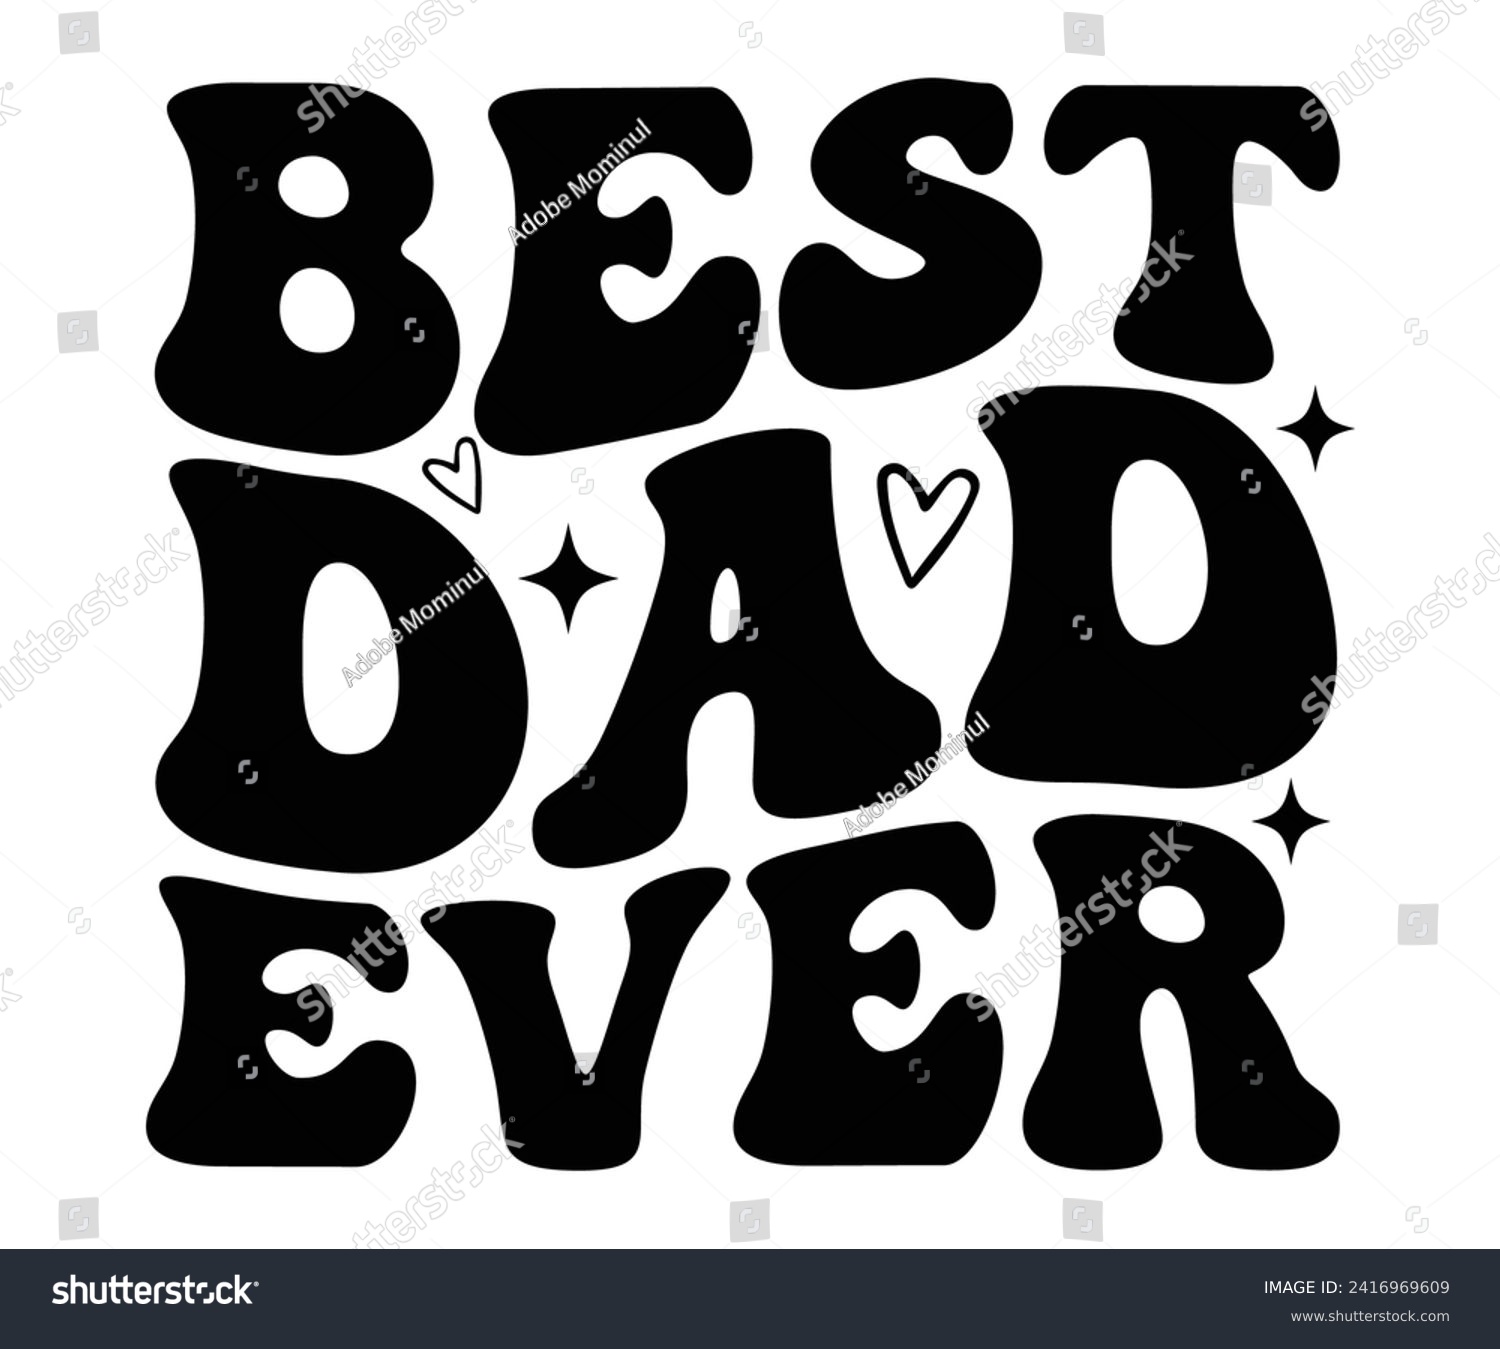 SVG of Best Dad Ever Retro Svg,Father's Day Svg,Papa svg,Grandpa Svg,Father's Day Saying Qoutes,Dad Svg,Funny Father, Gift For Dad Svg,Daddy Svg,Family Svg,T shirt Design,Svg Cut File,Typography svg